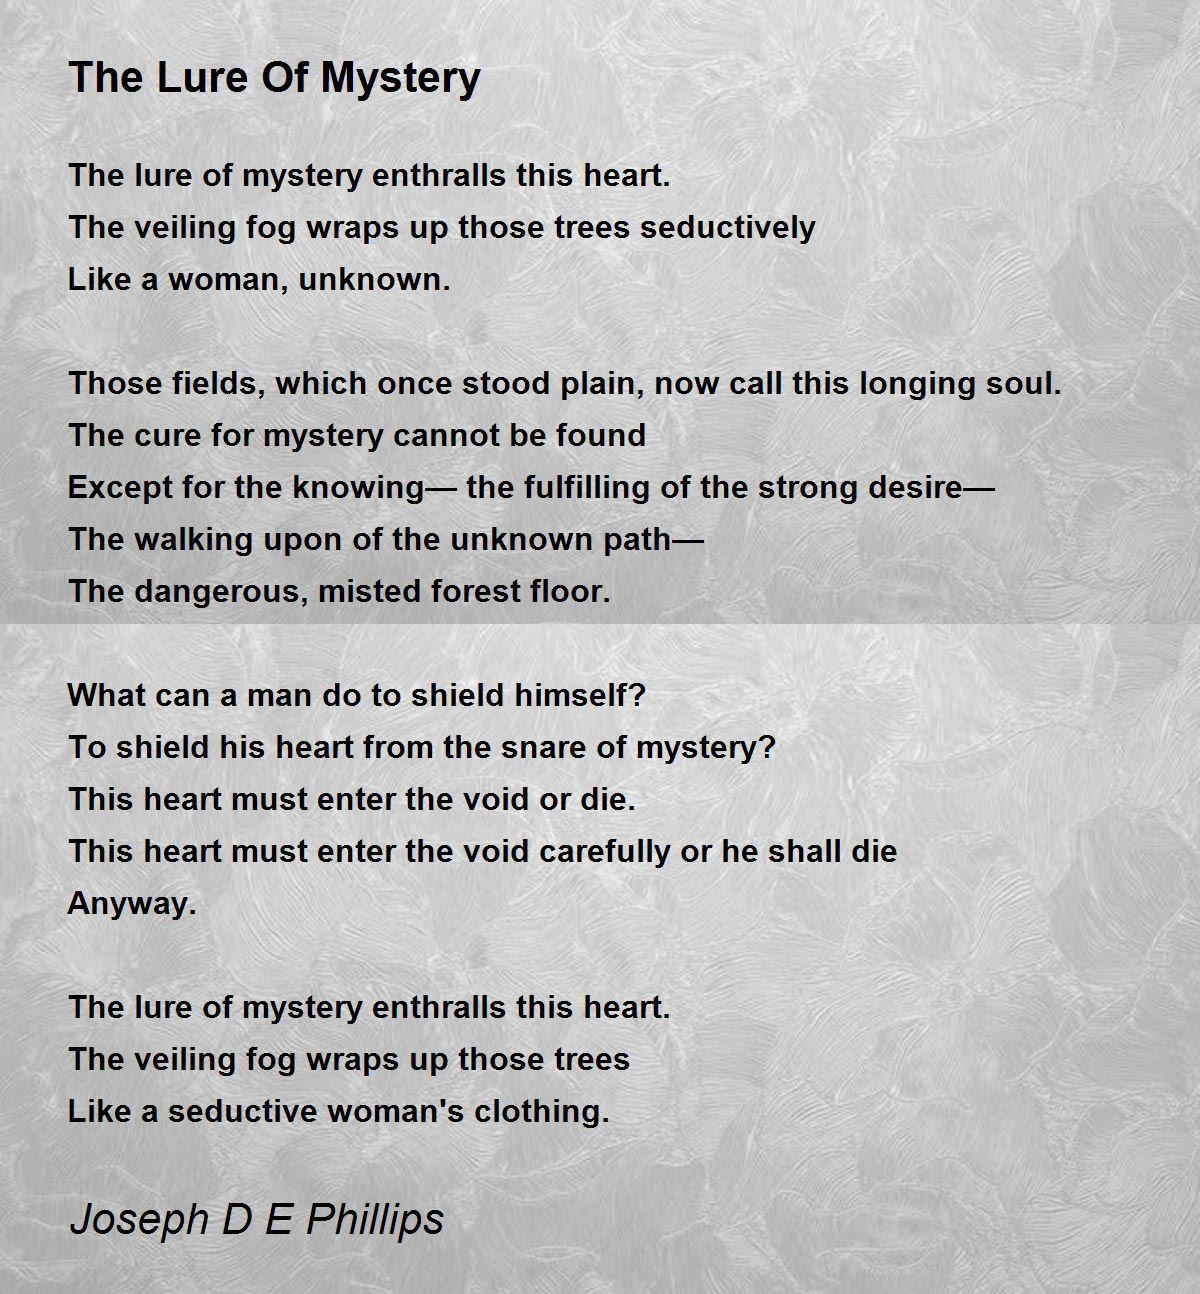 https://img.poemhunter.com/i/poem_images/683/the-lure-of-mystery.jpg